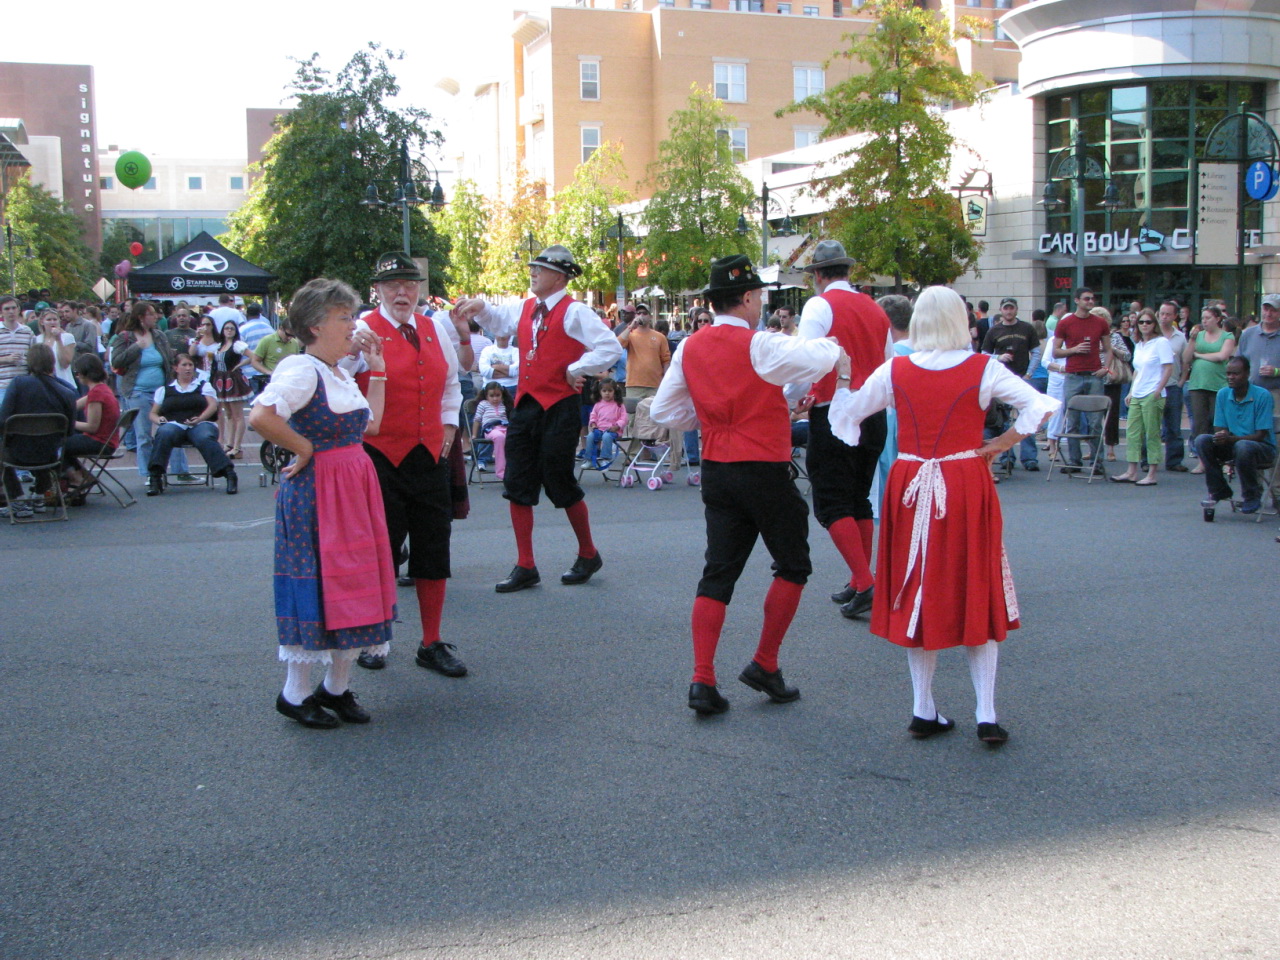 a crowd watches two men in colonial garb dance in front of a crowd